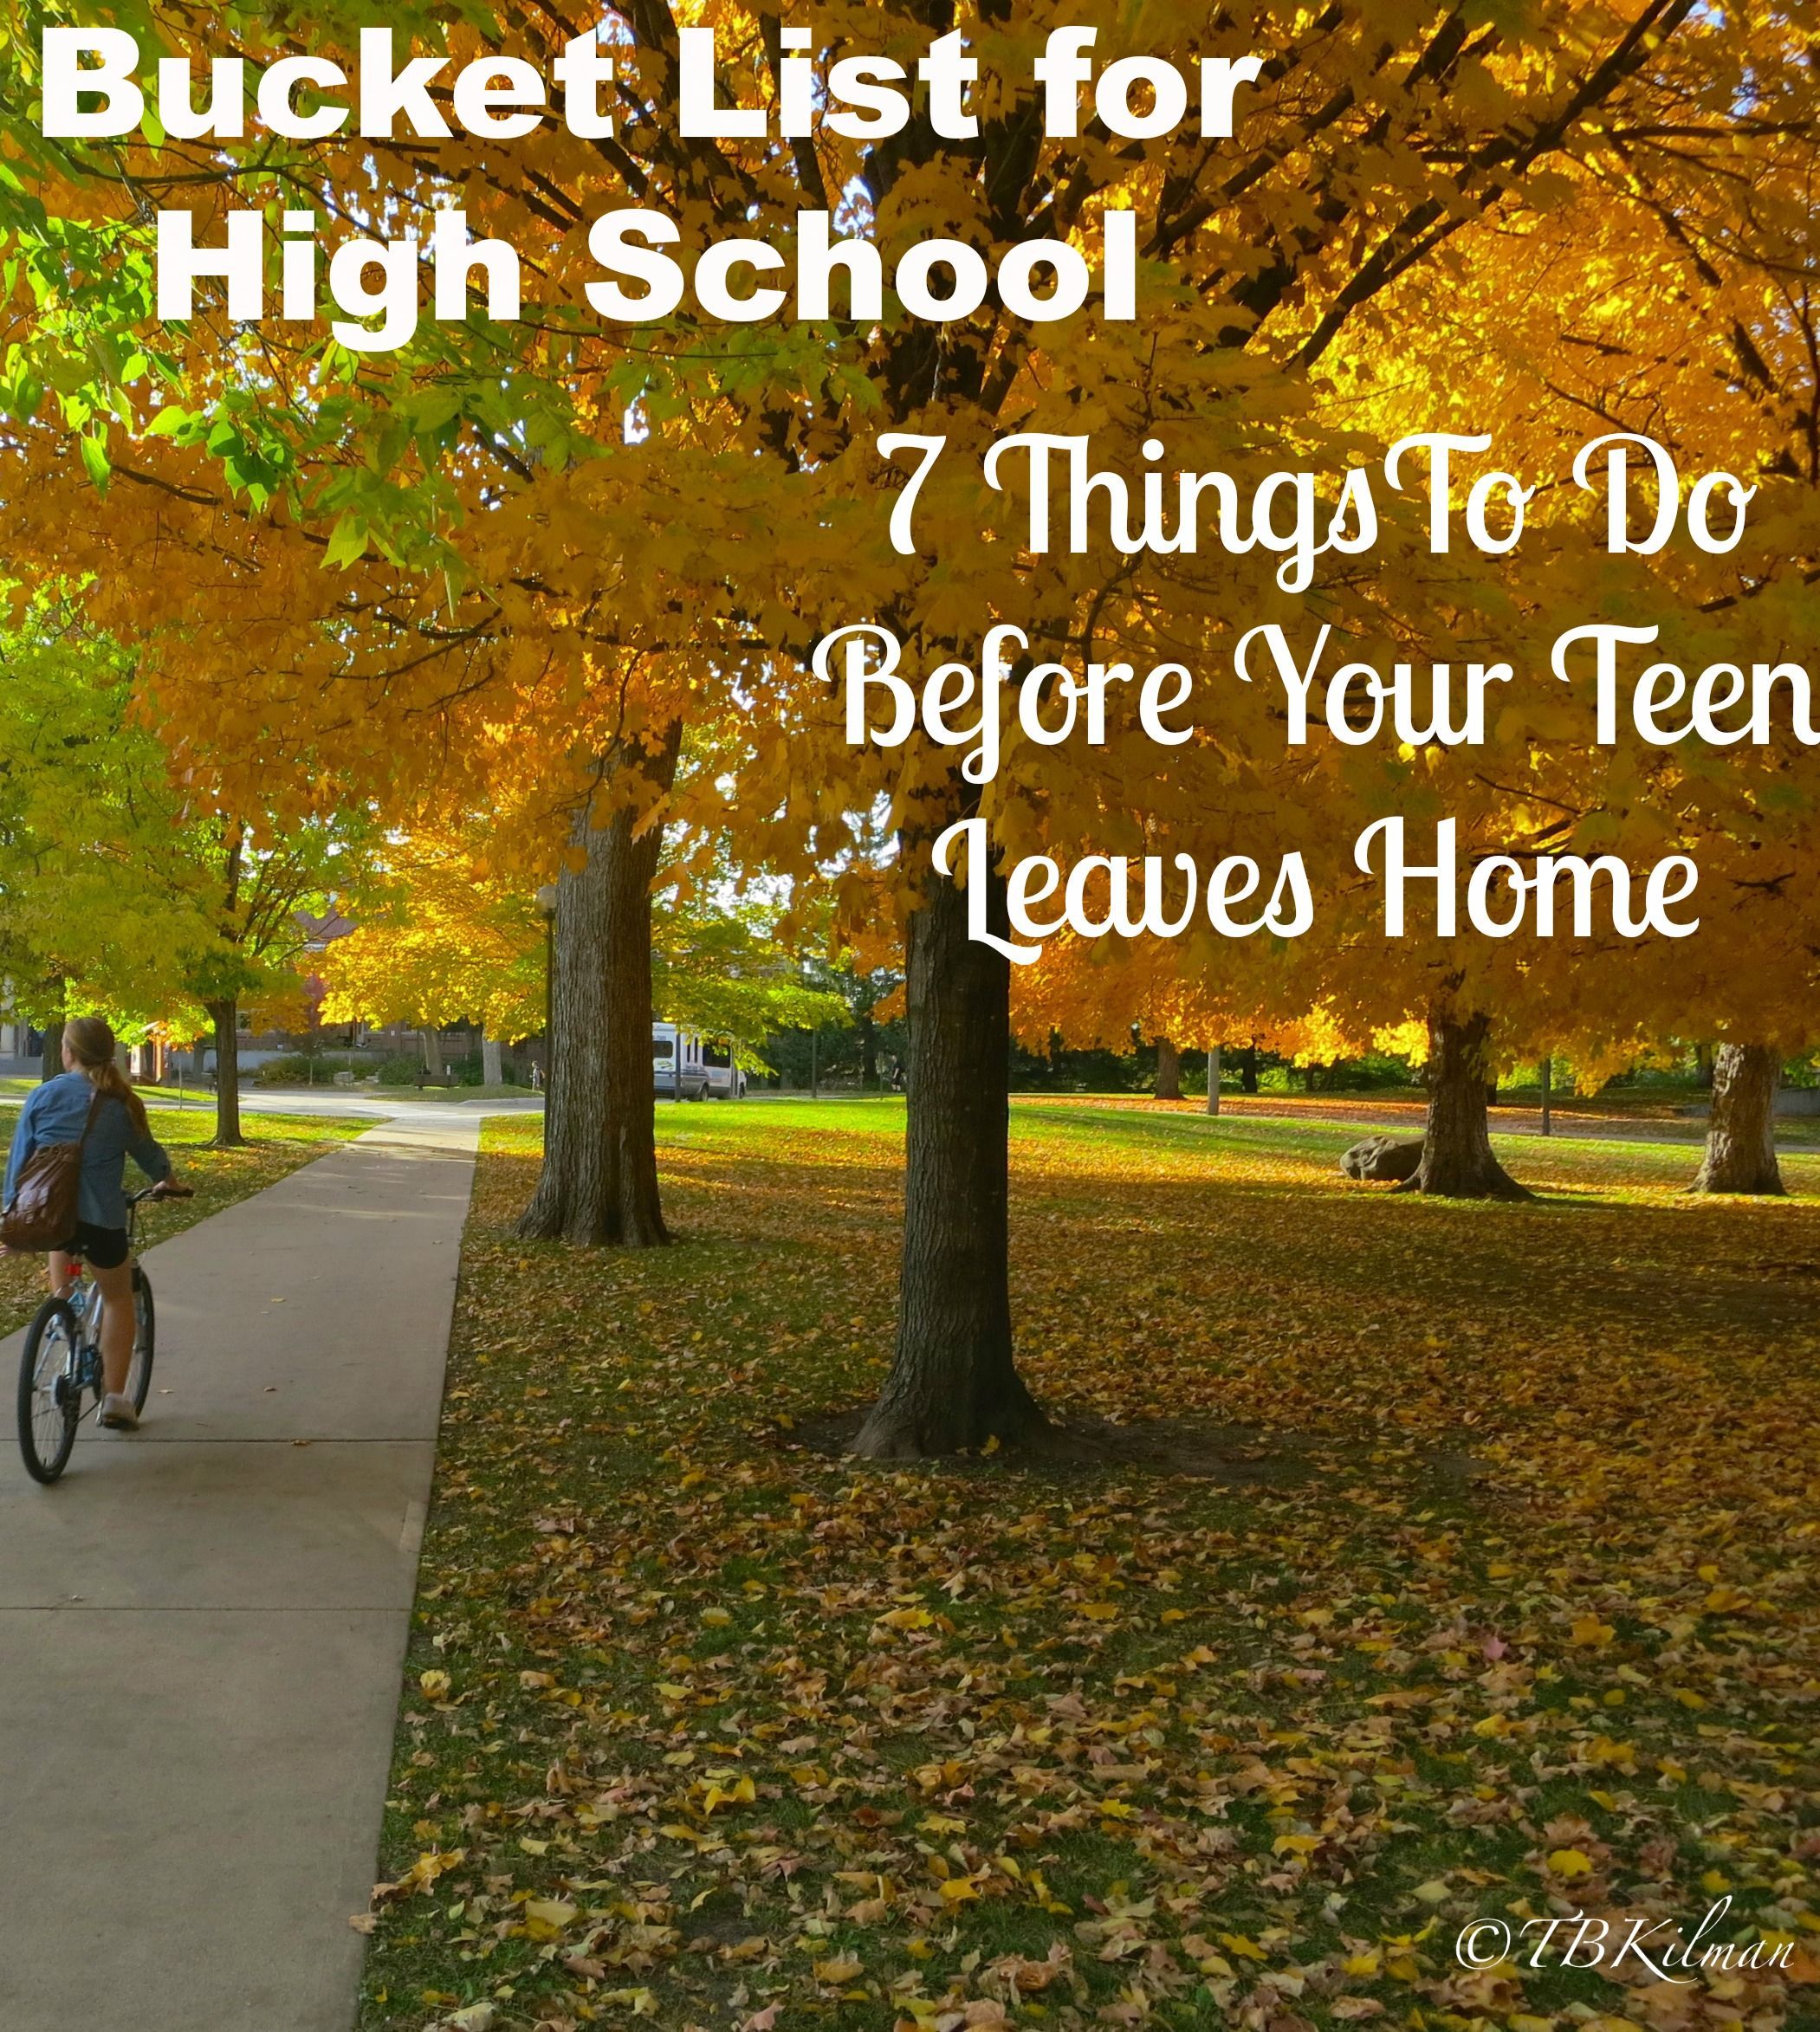 7 important things to do before your teen leave for college.  Here is the Parents Bucket List for high school.